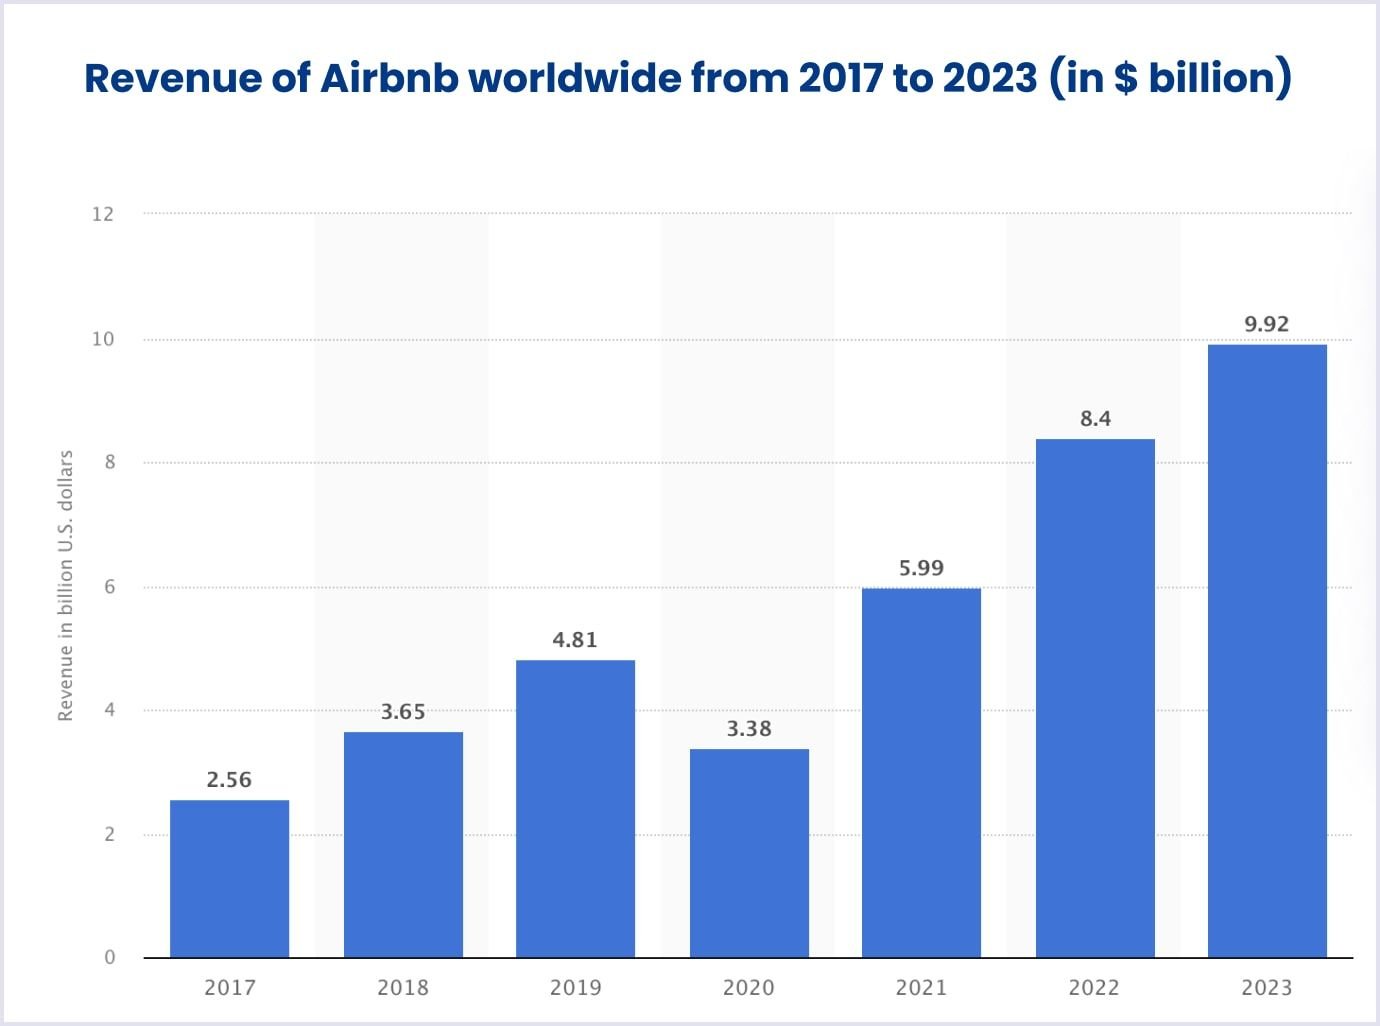 Revenue of Airbnb worldwide from 2017 to 2021 by Statista